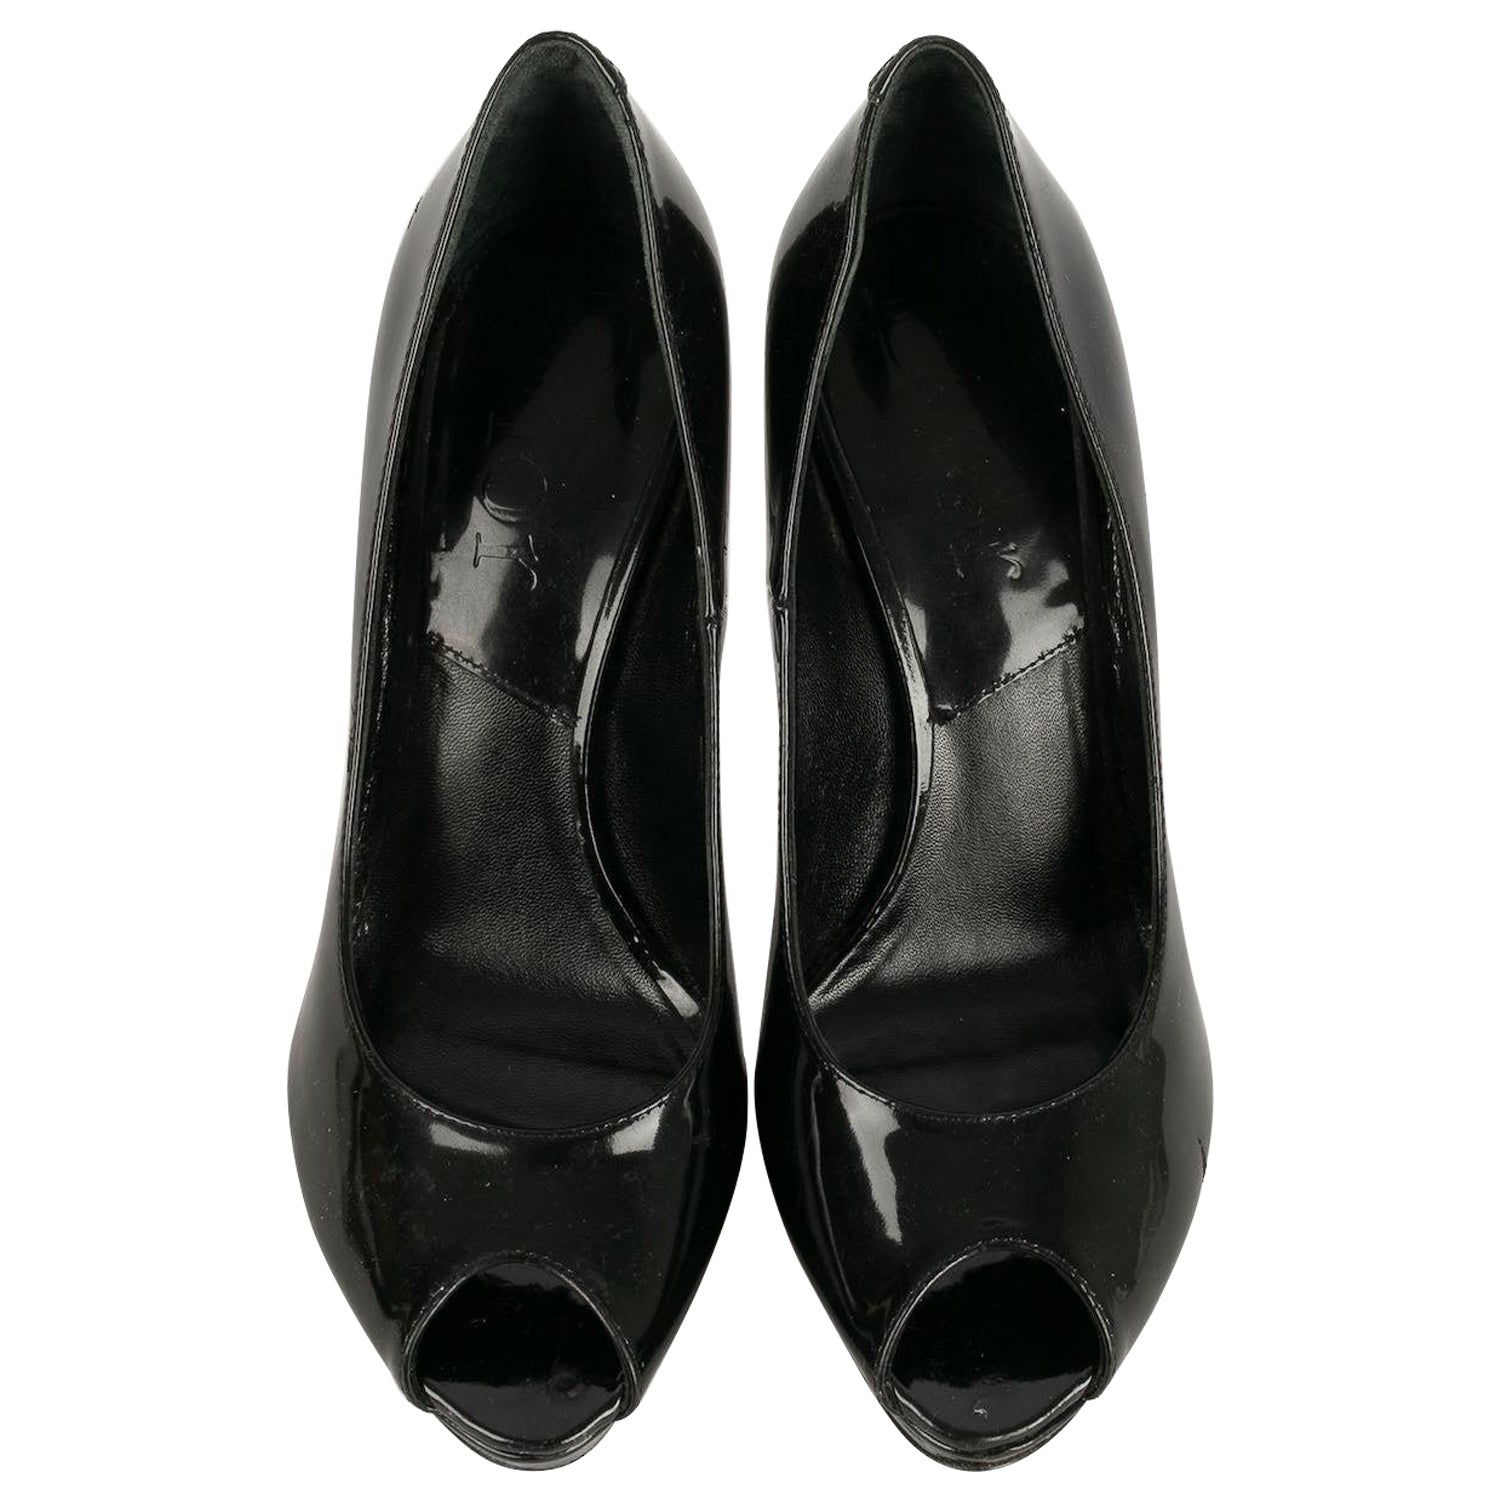 Christian Dior Shoes in Black Patent Leather Pumps For Sale